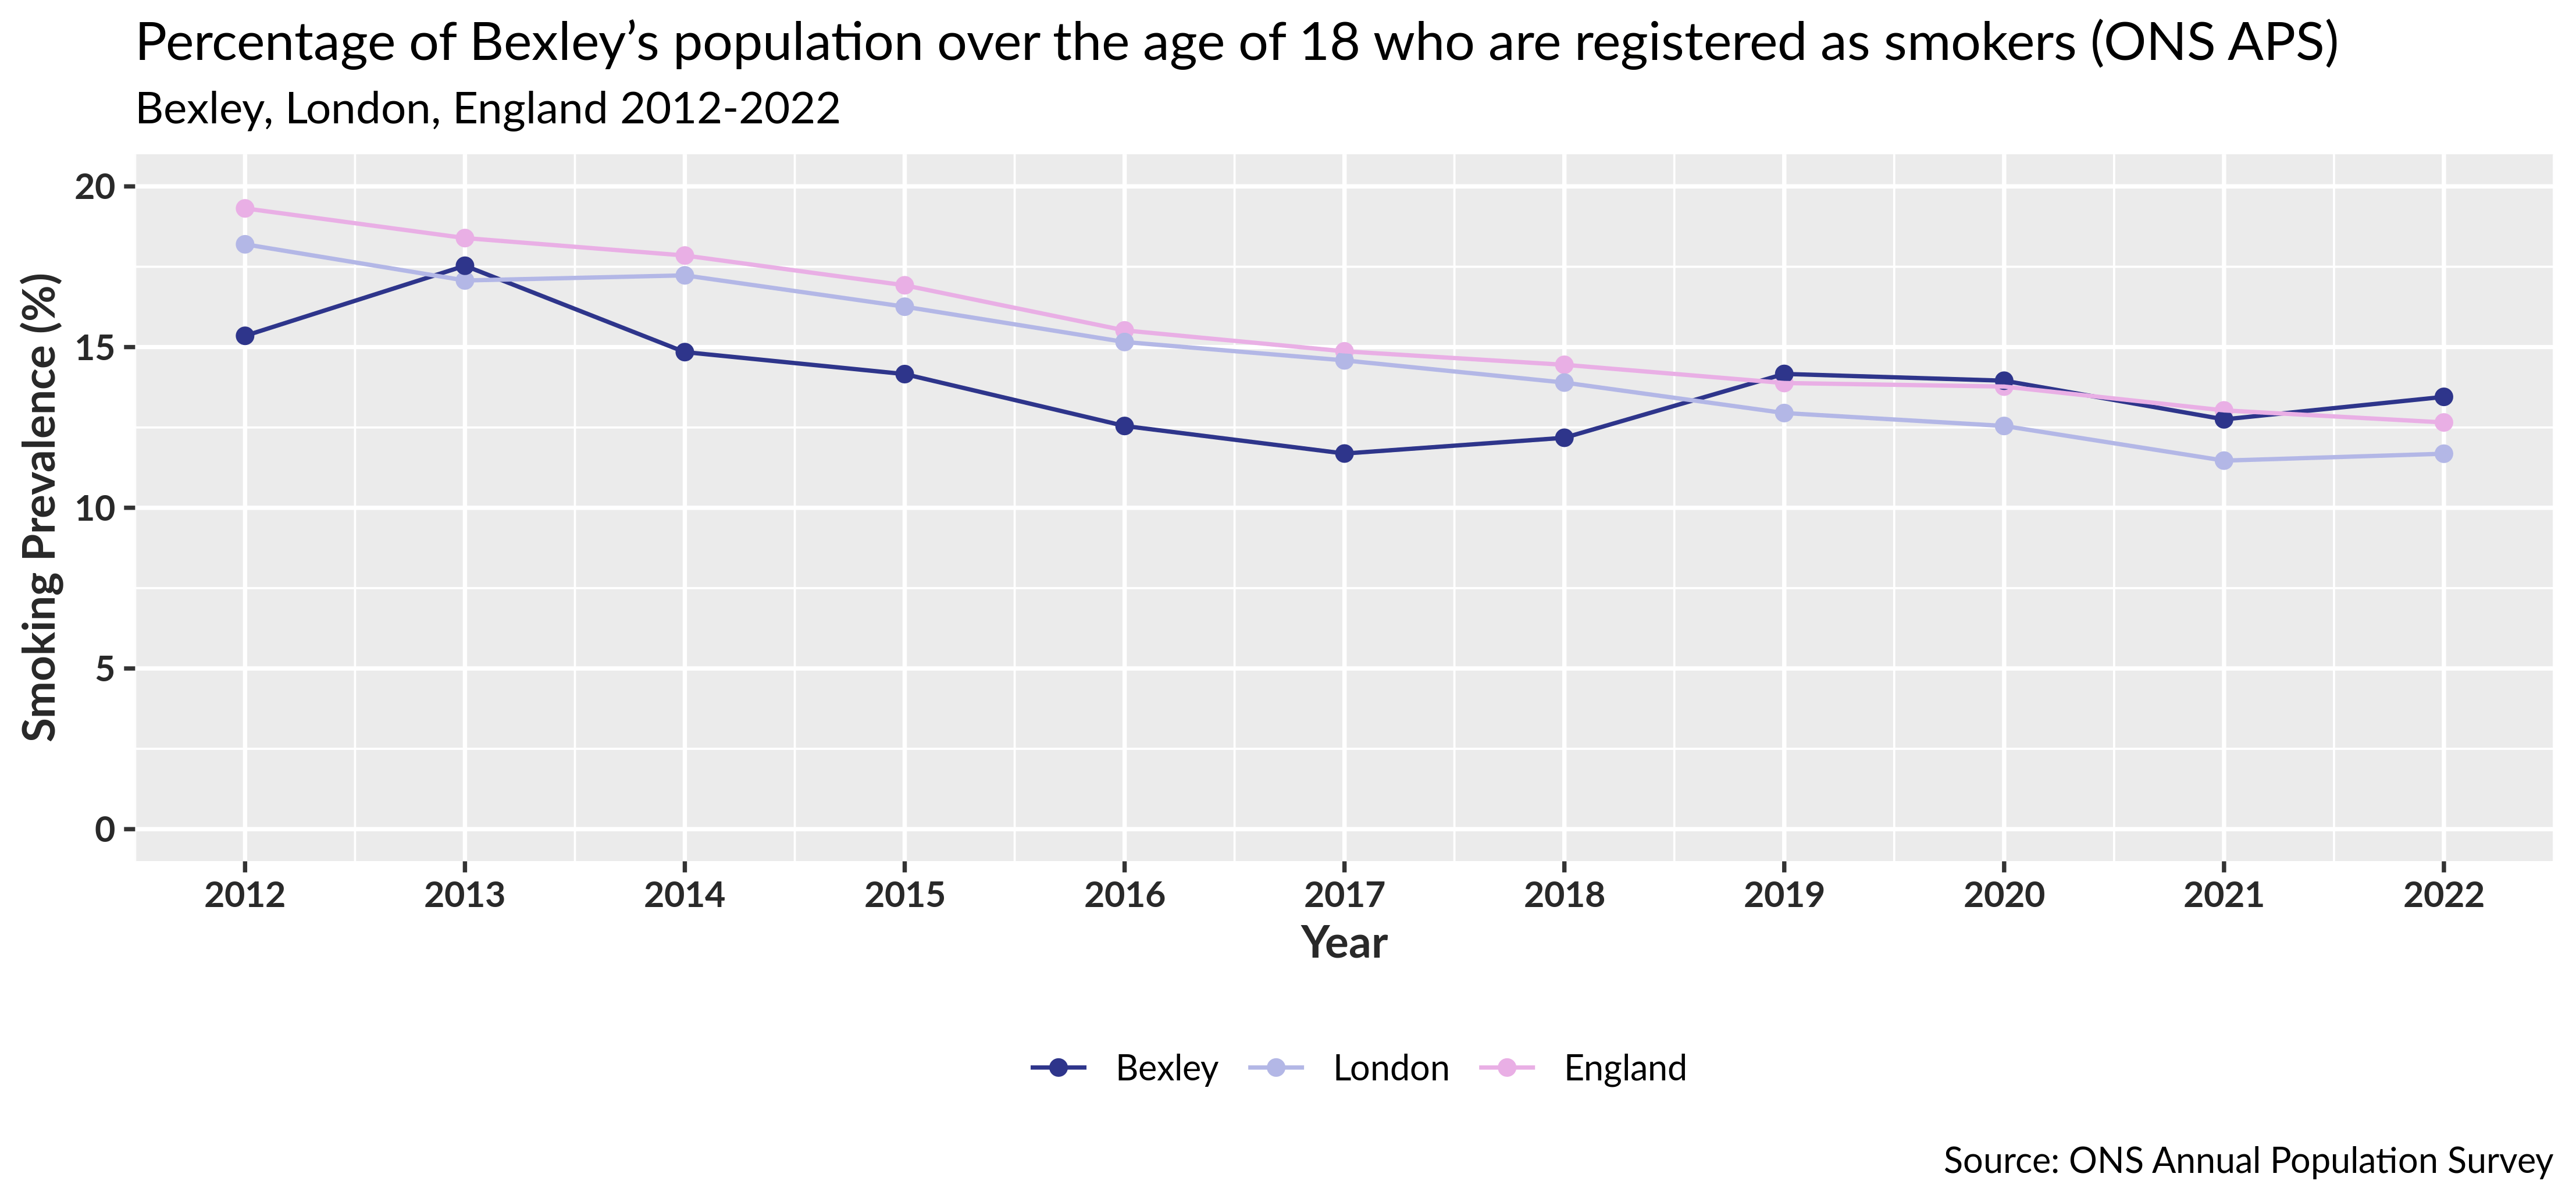 Percentage of Bexley’s population over the age of 18 who are registered  as smoking (ONS APS)